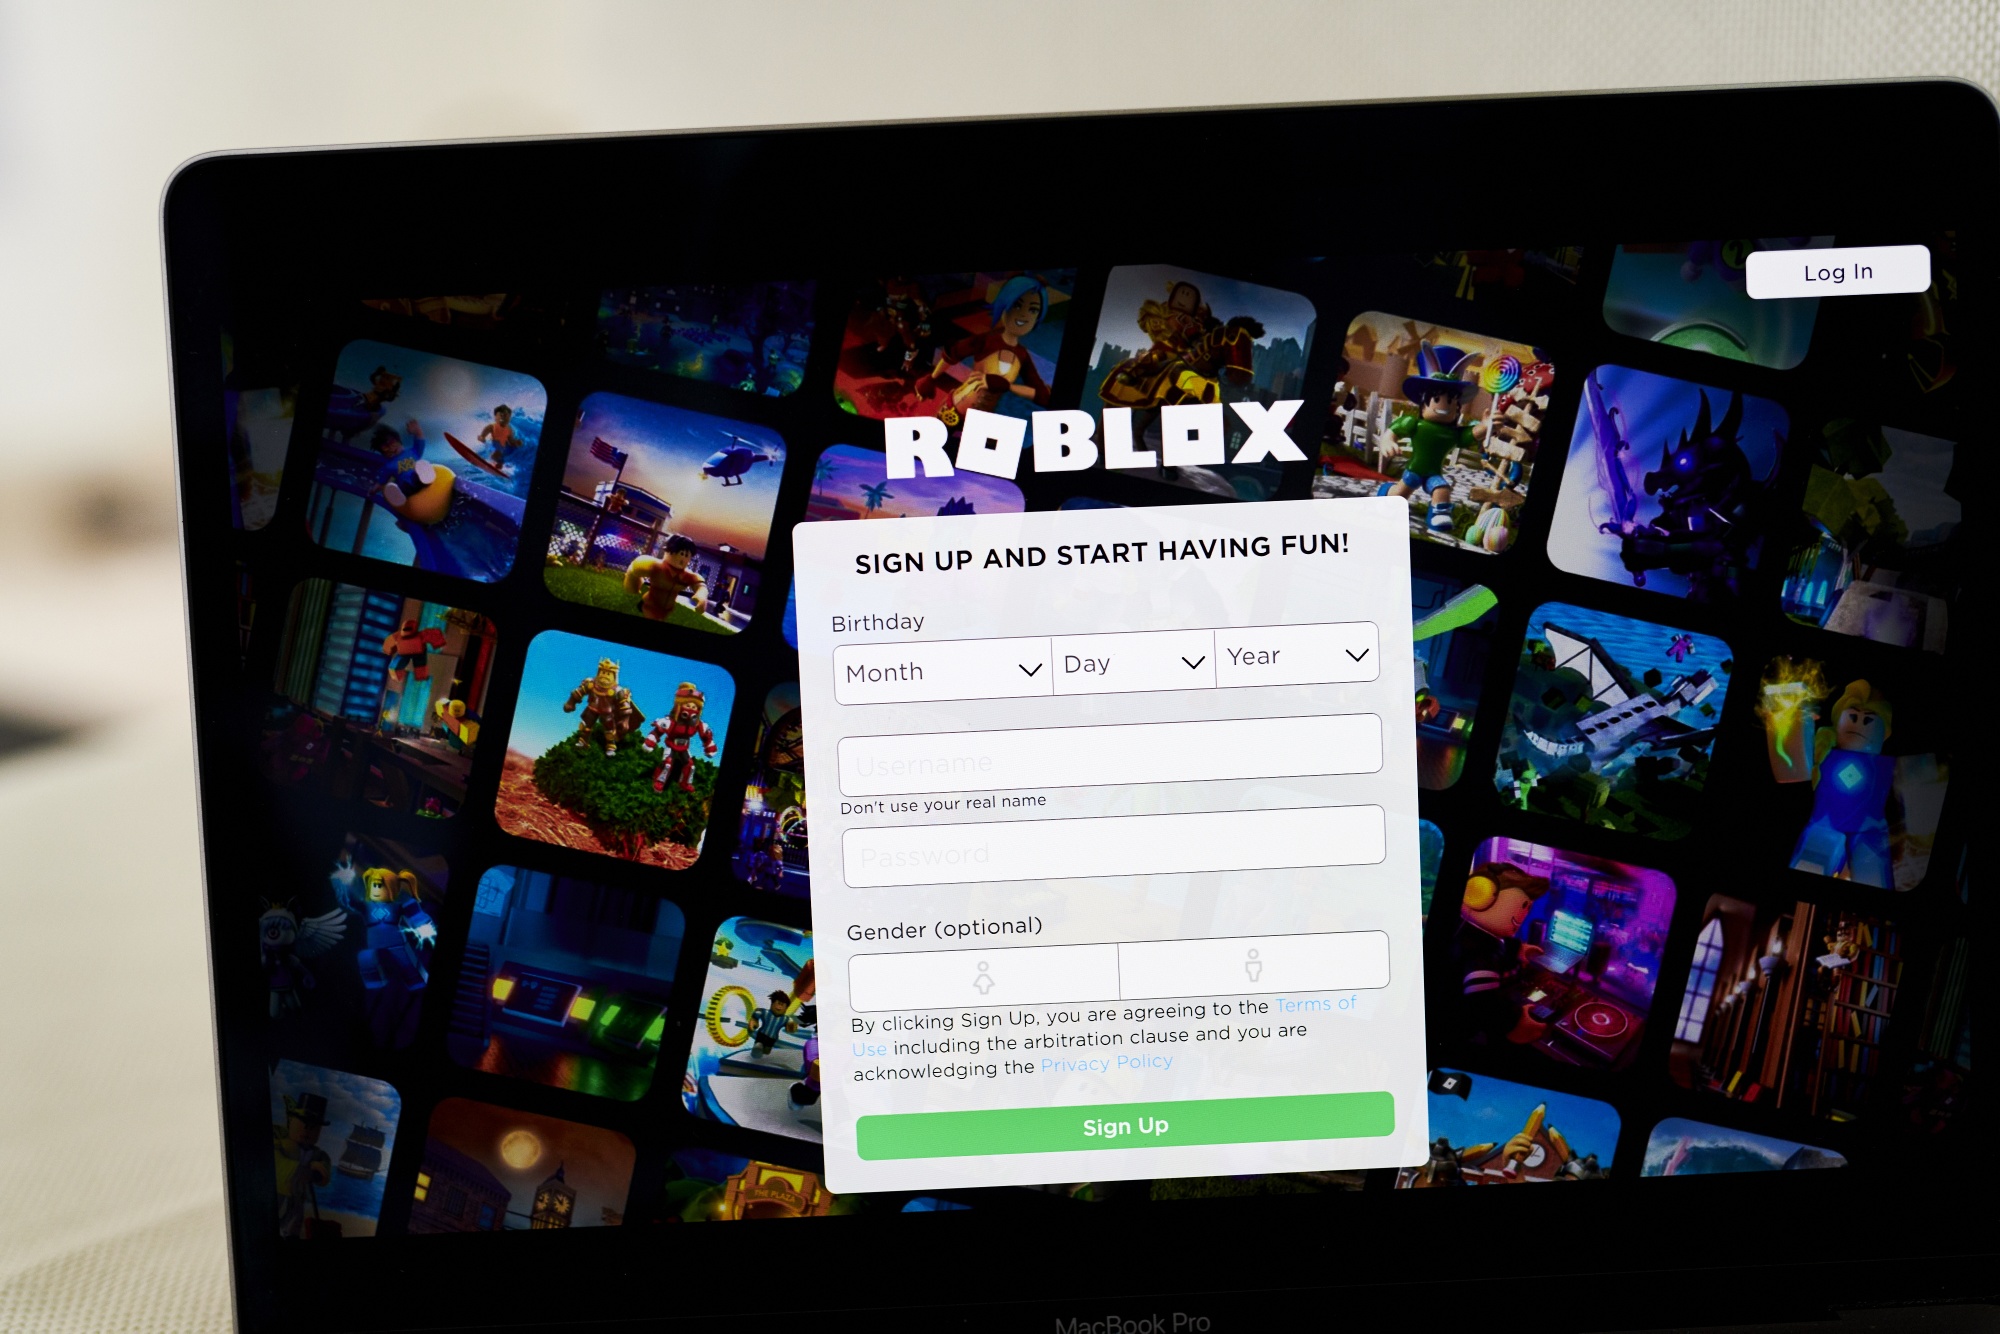 Roblox founder and CEO: Our business plan 17 years ago predicted